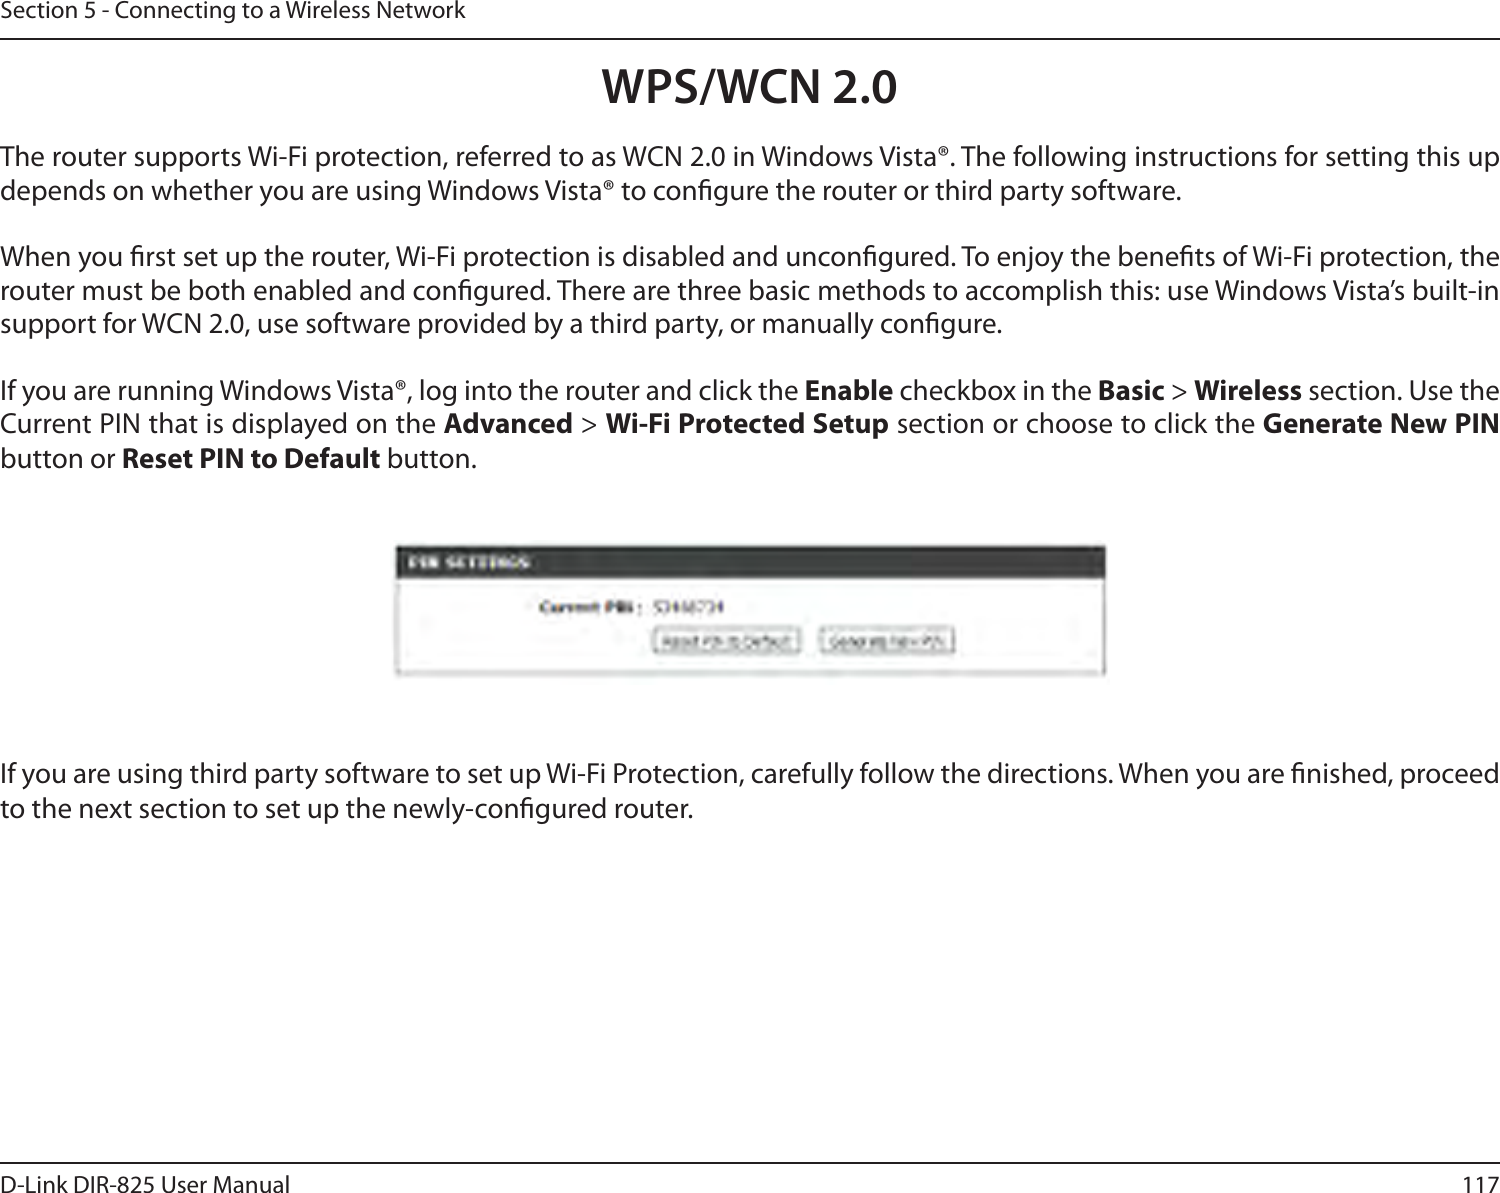 117D-Link DIR-825 User ManualSection 5 - Connecting to a Wireless NetworkWPS/WCN 2.0The router supports Wi-Fi protection, referred to as WCN 2.0 in Windows Vista®. The following instructions for setting this up depends on whether you are using Windows Vista® to congure the router or third party software.        When you rst set up the router, Wi-Fi protection is disabled and uncongured. To enjoy the benets of Wi-Fi protection, the router must be both enabled and congured. There are three basic methods to accomplish this: use Windows Vista’s built-in support for WCN 2.0, use software provided by a third party, or manually congure. If you are running Windows Vista®, log into the router and click the Enable checkbox in the Basic &gt; Wireless section. Use the Current PIN that is displayed on the Advanced &gt; Wi-Fi Protected Setup section or choose to click the Generate New PIN button or Reset PIN to Default button. If you are using third party software to set up Wi-Fi Protection, carefully follow the directions. When you are nished, proceed to the next section to set up the newly-congured router. 